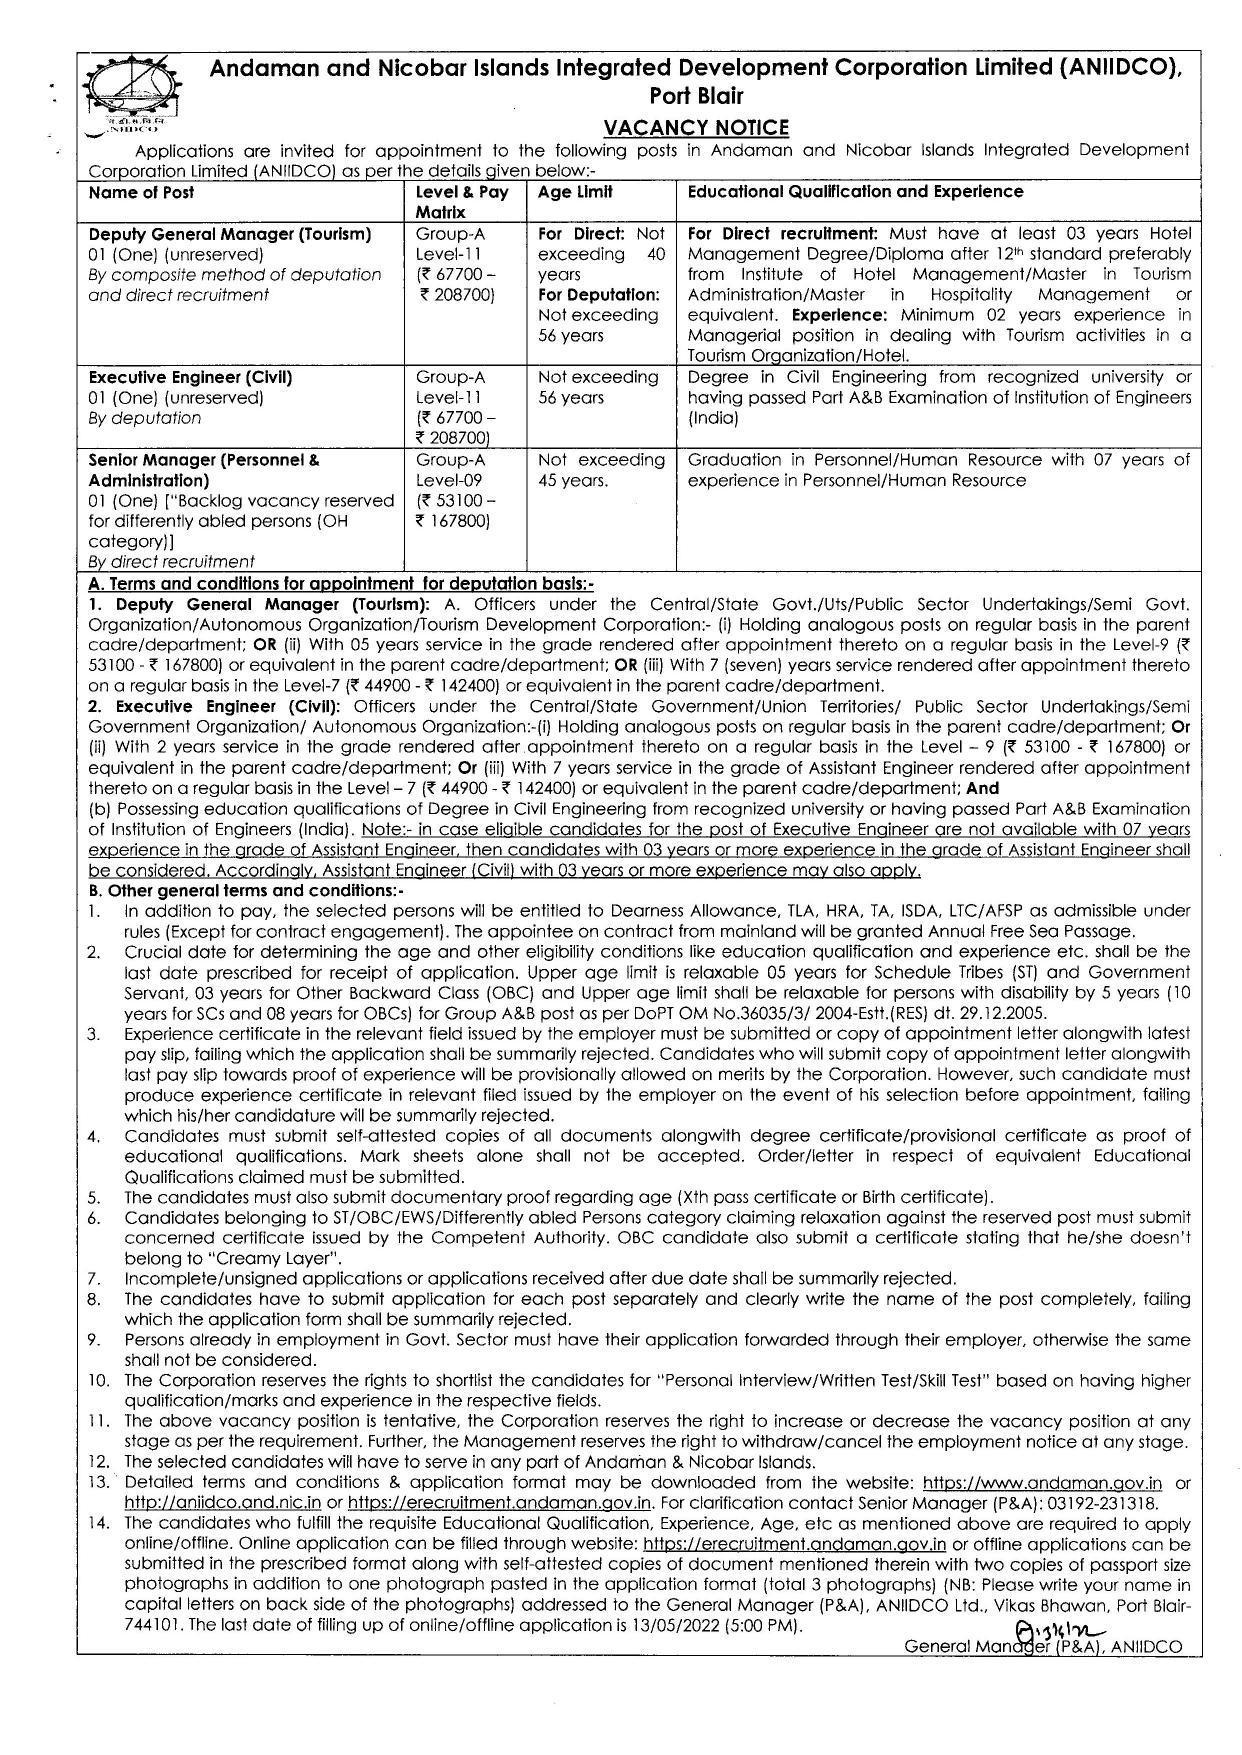 ANIIDCO Invites Application for Senior Manager, Executive Engineer and Deputy General Manager Recruitment 2022 - Page 3